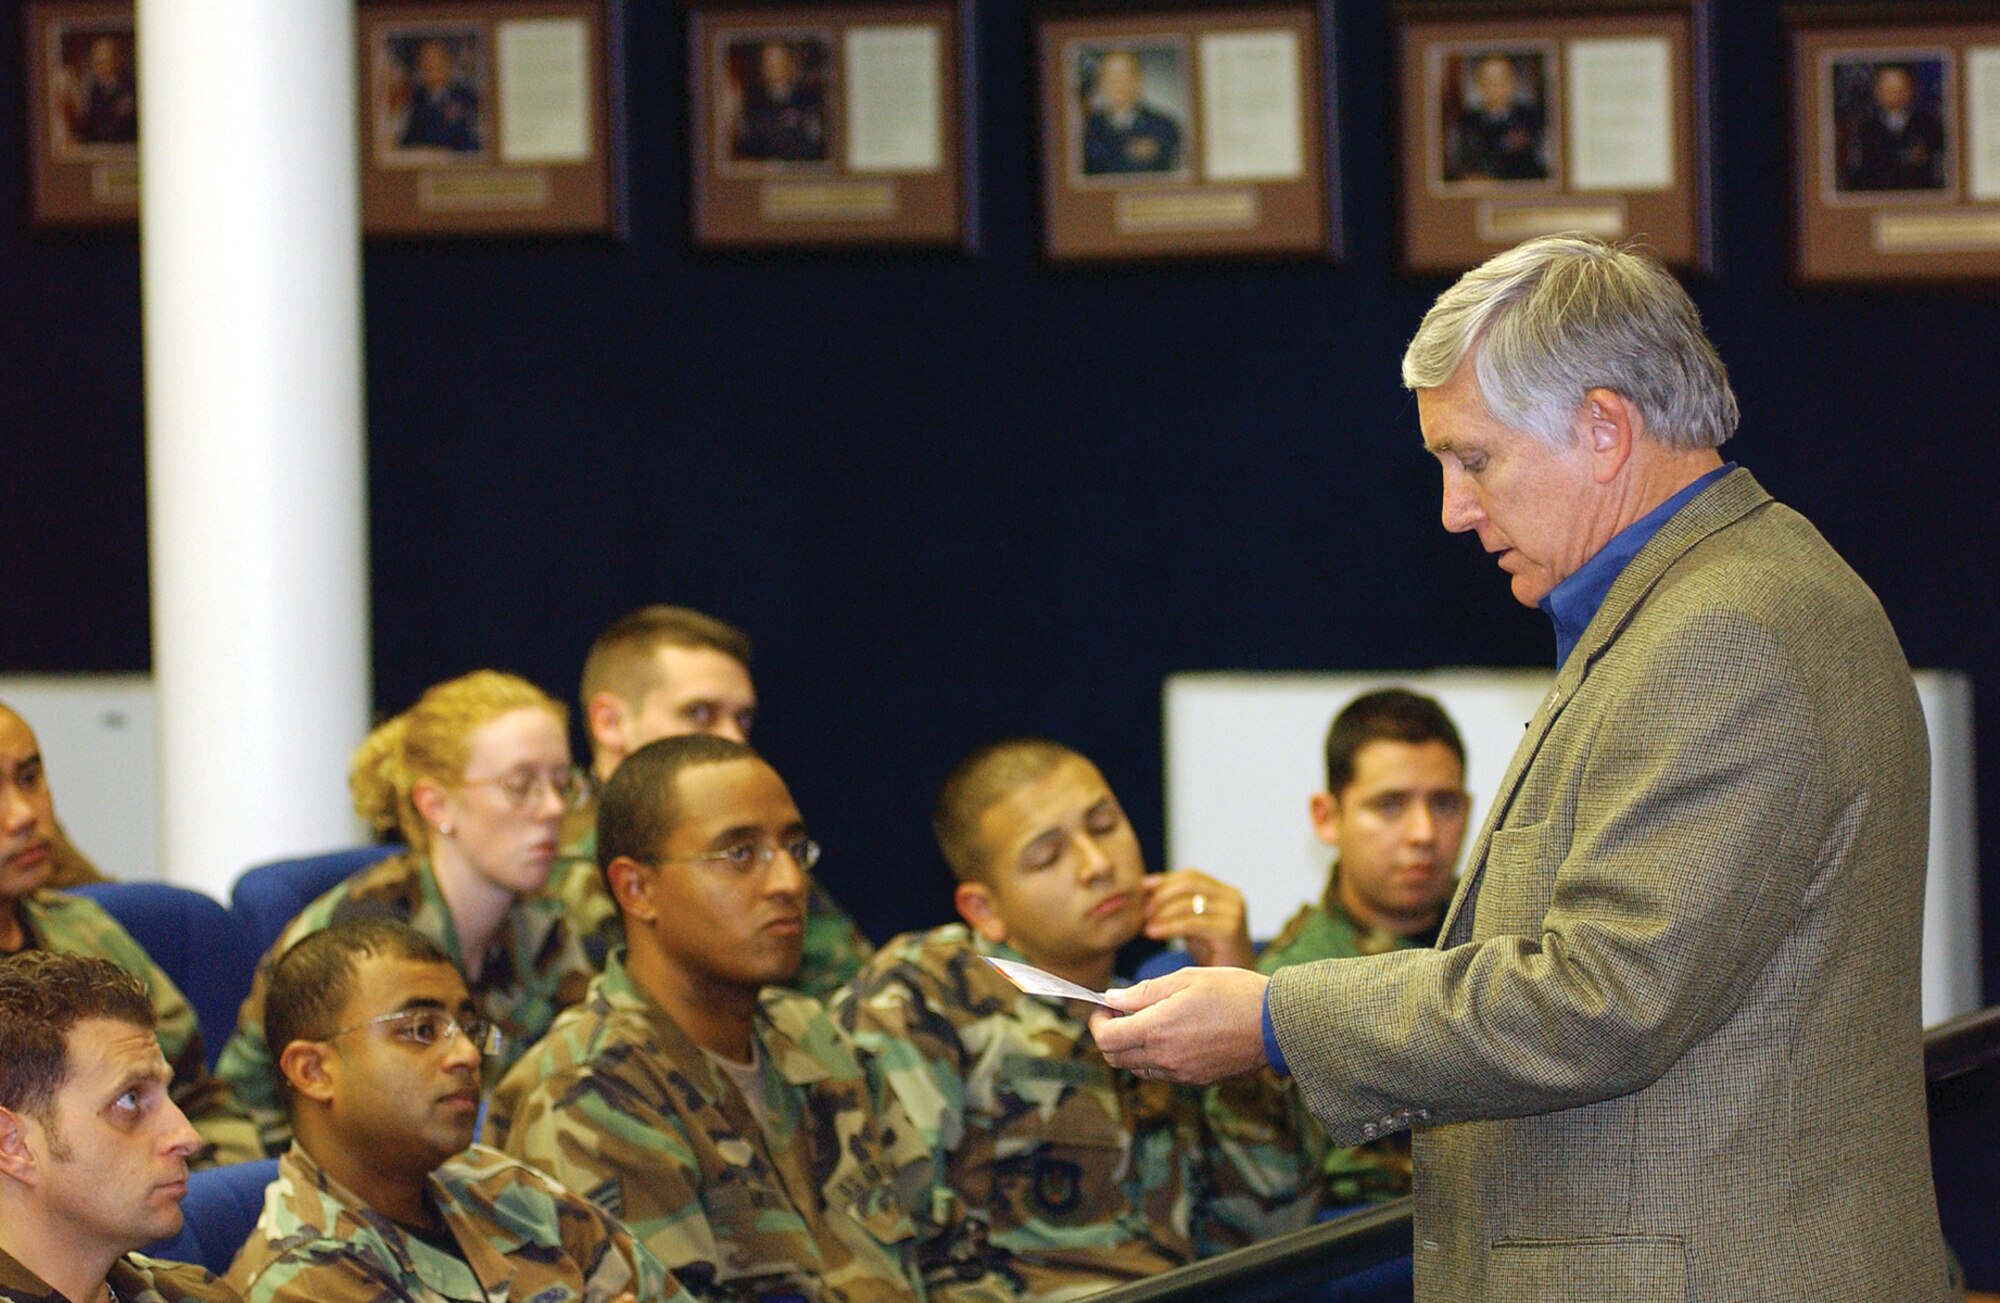 Mr. Bob Largent speaks at the Airman Leadership School during his visit to Aviano Air Base, Italy, Oct 25, 2006.  Mr. Largent, Air Force Association chairman of the board, visited Aviano to spend time with Airman and get a view of how the force is doing.  (U.S. Air Force photo/Airman 1st Class Liliana Moreno)